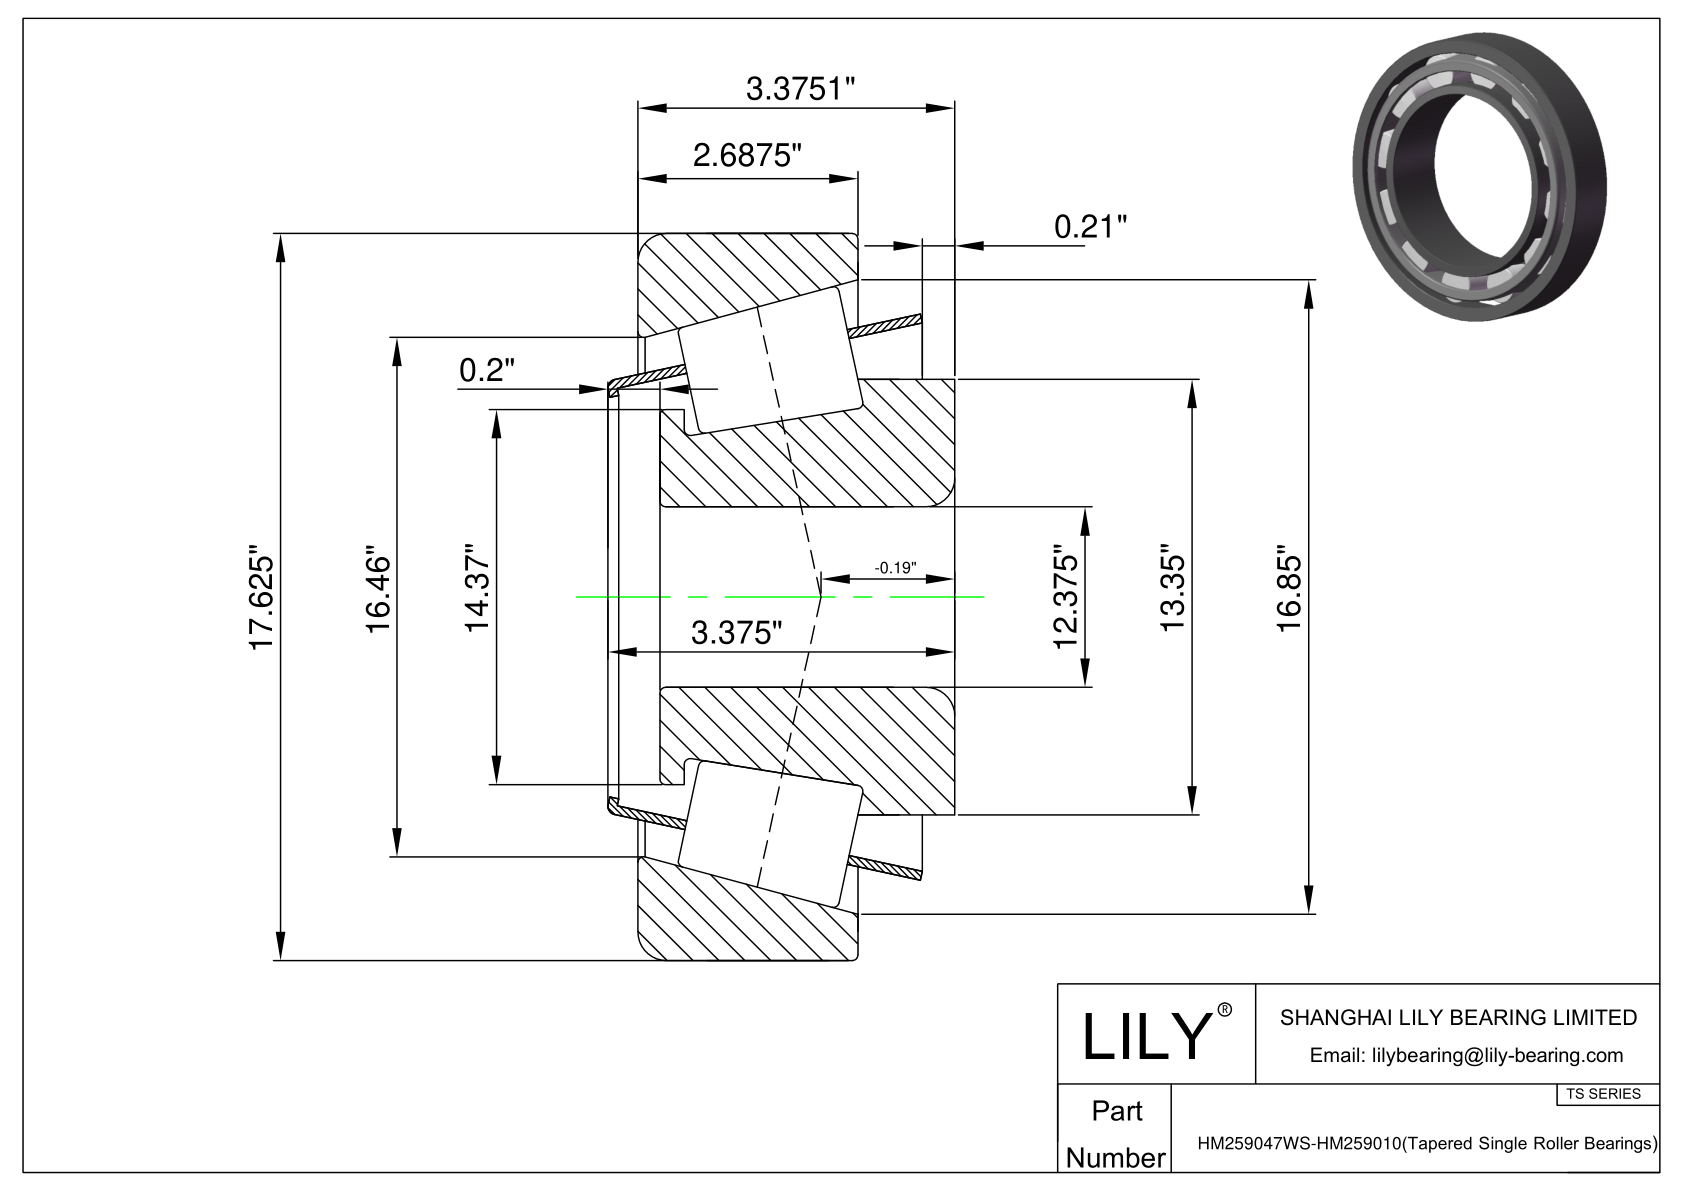 HM259047WS-HM259010 TS (Tapered Single Roller Bearings) (Imperial) cad drawing